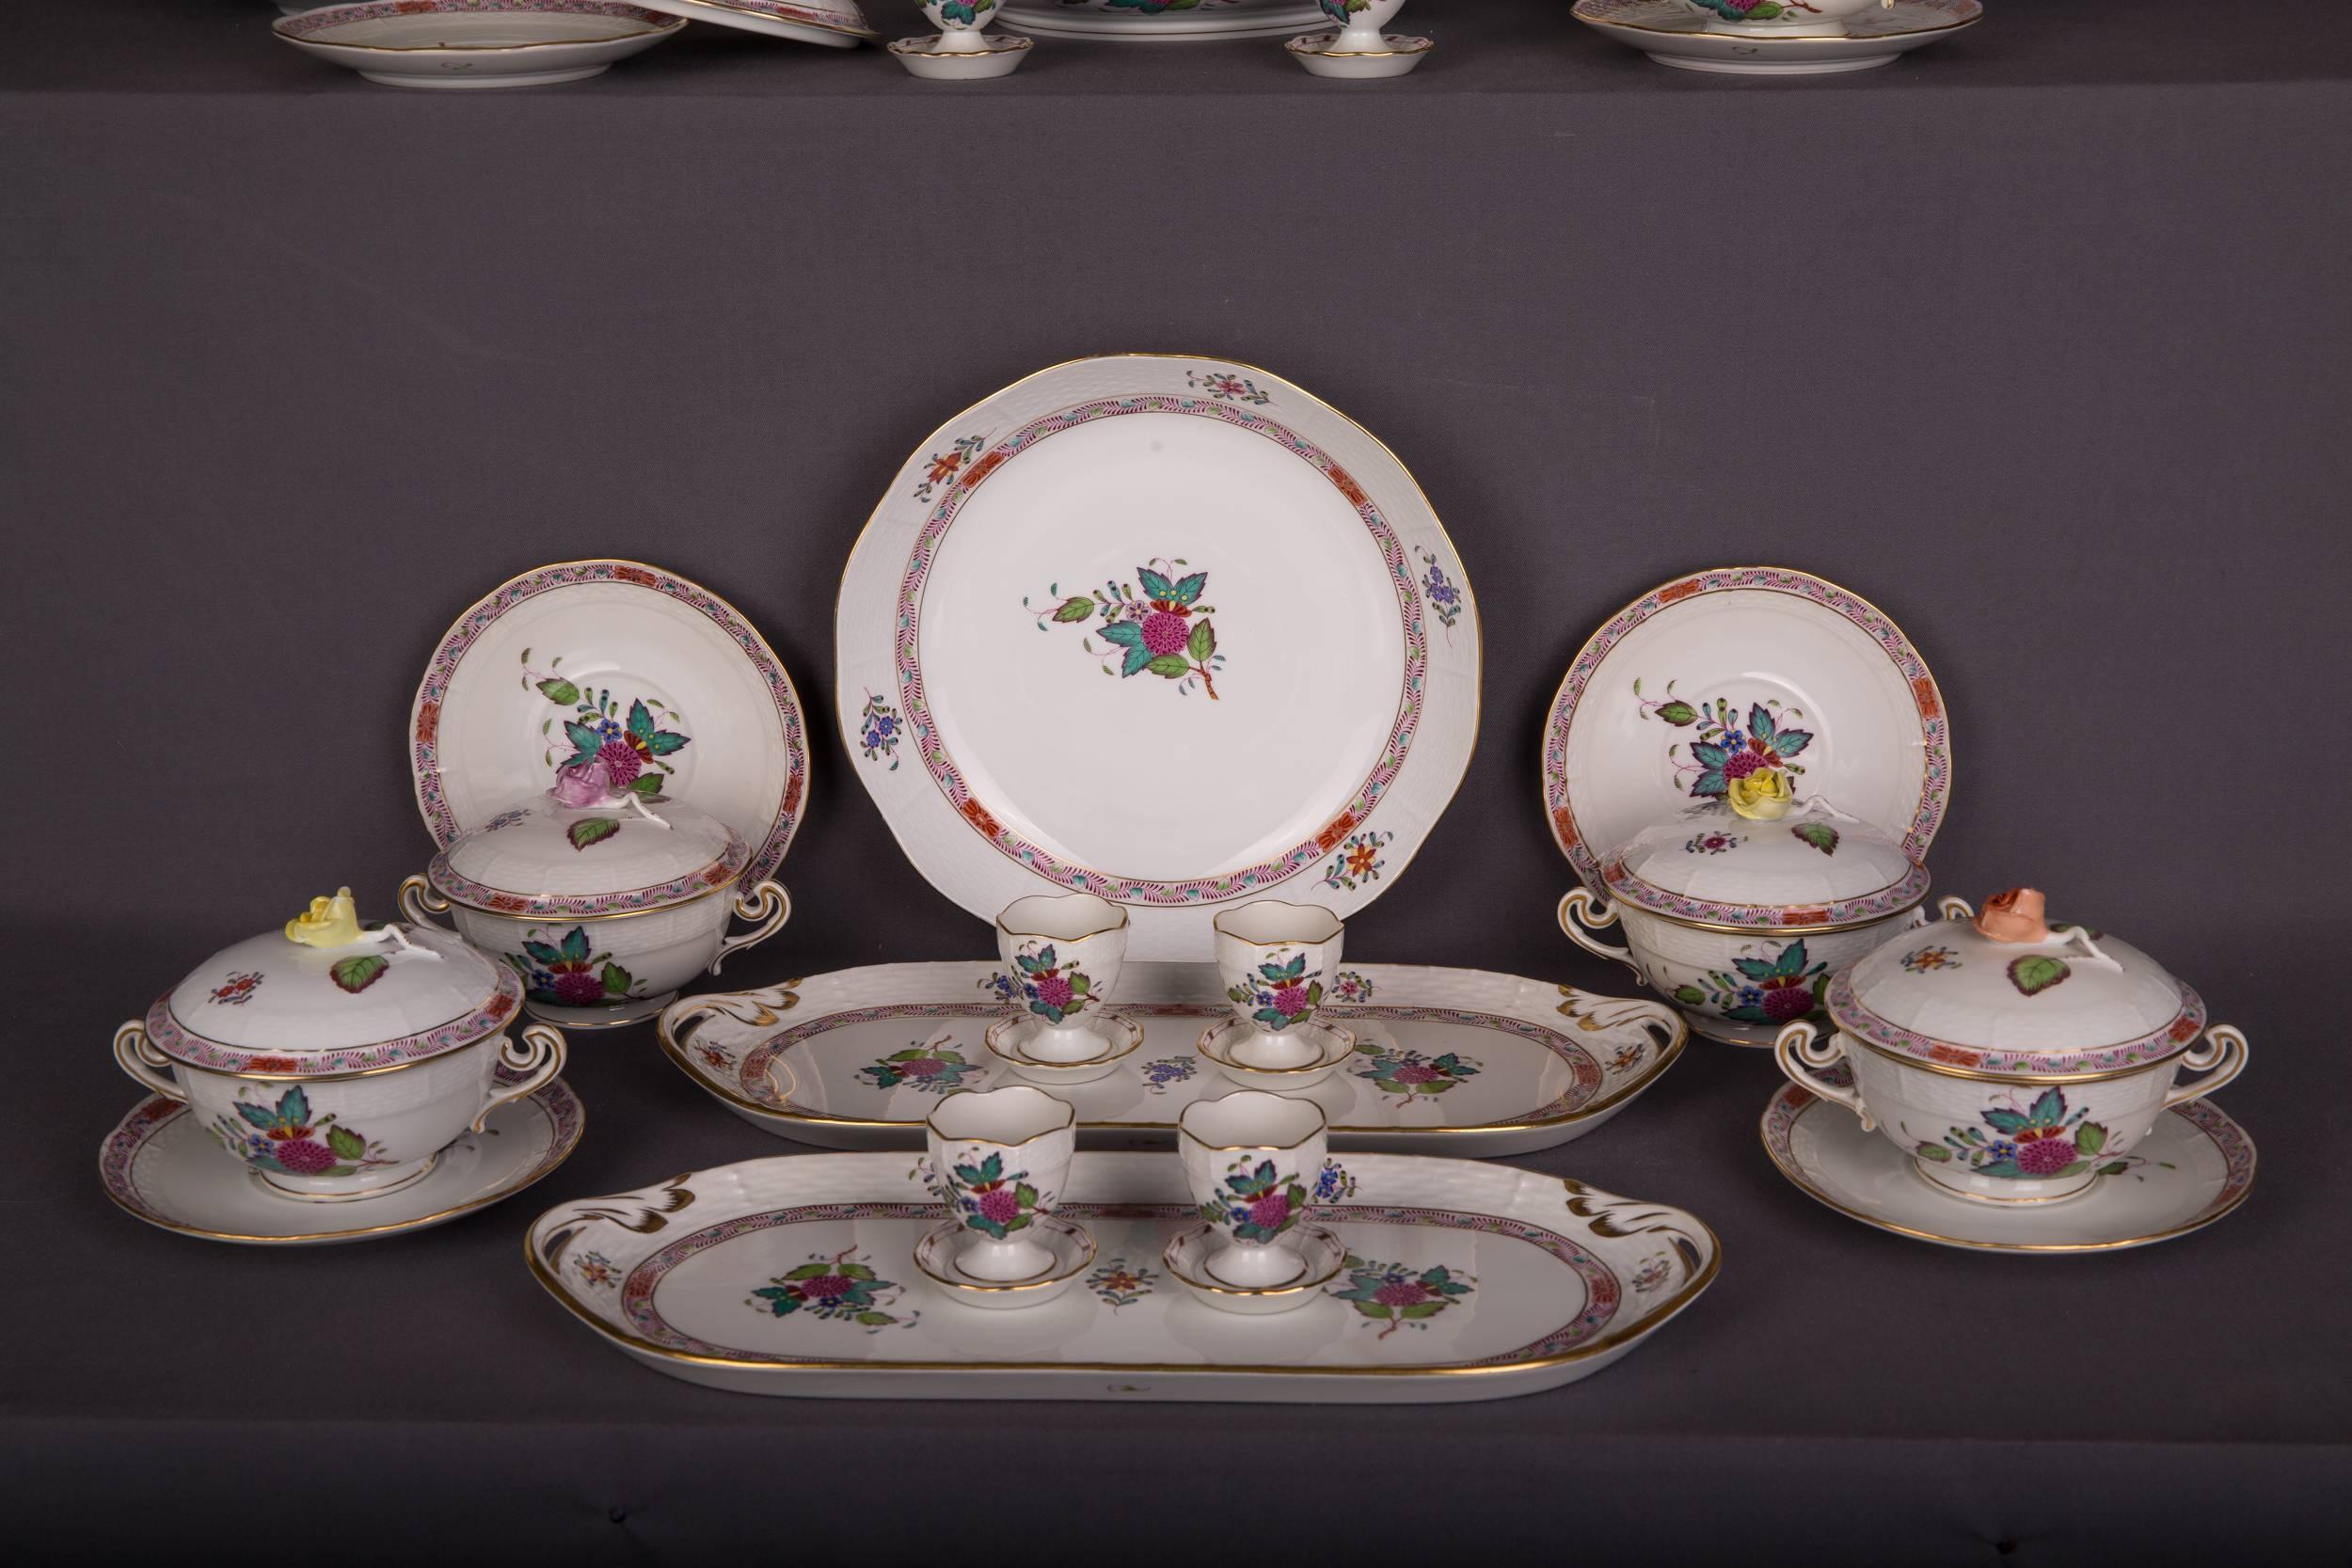 Other Extensive Rare Herend Dining Service Porcelain with a Lot of Flowers and Gold For Sale